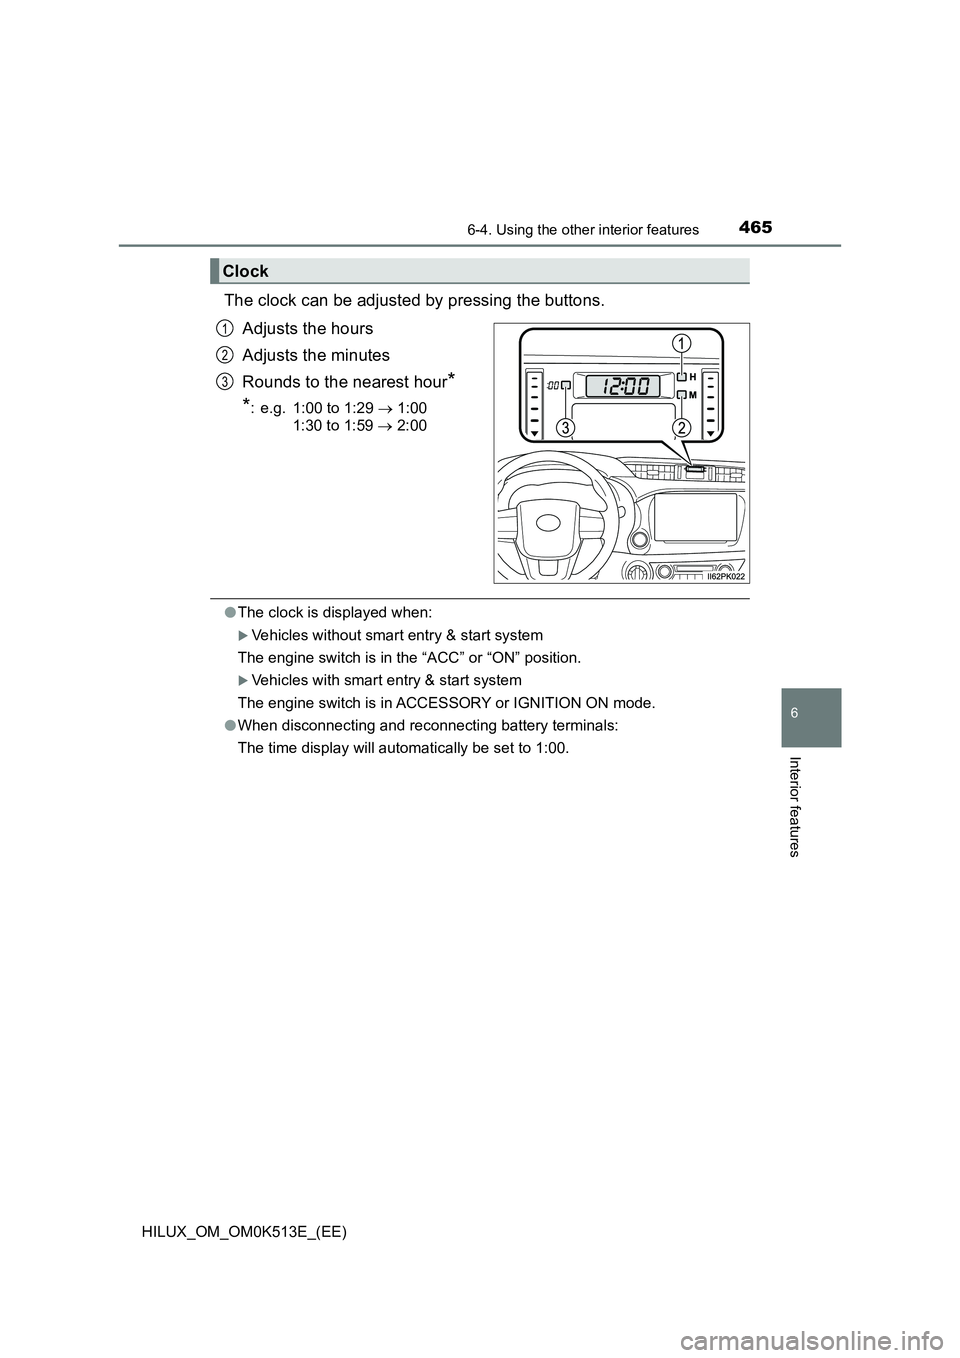 TOYOTA HILUX 2022  Owners Manual 4656-4. Using the other interior features
HILUX_OM_OM0K513E_(EE)
6
Interior features
The clock can be adjusted by pressing the buttons. 
Adjusts the hours 
Adjusts the minutes 
Rounds to the nearest h